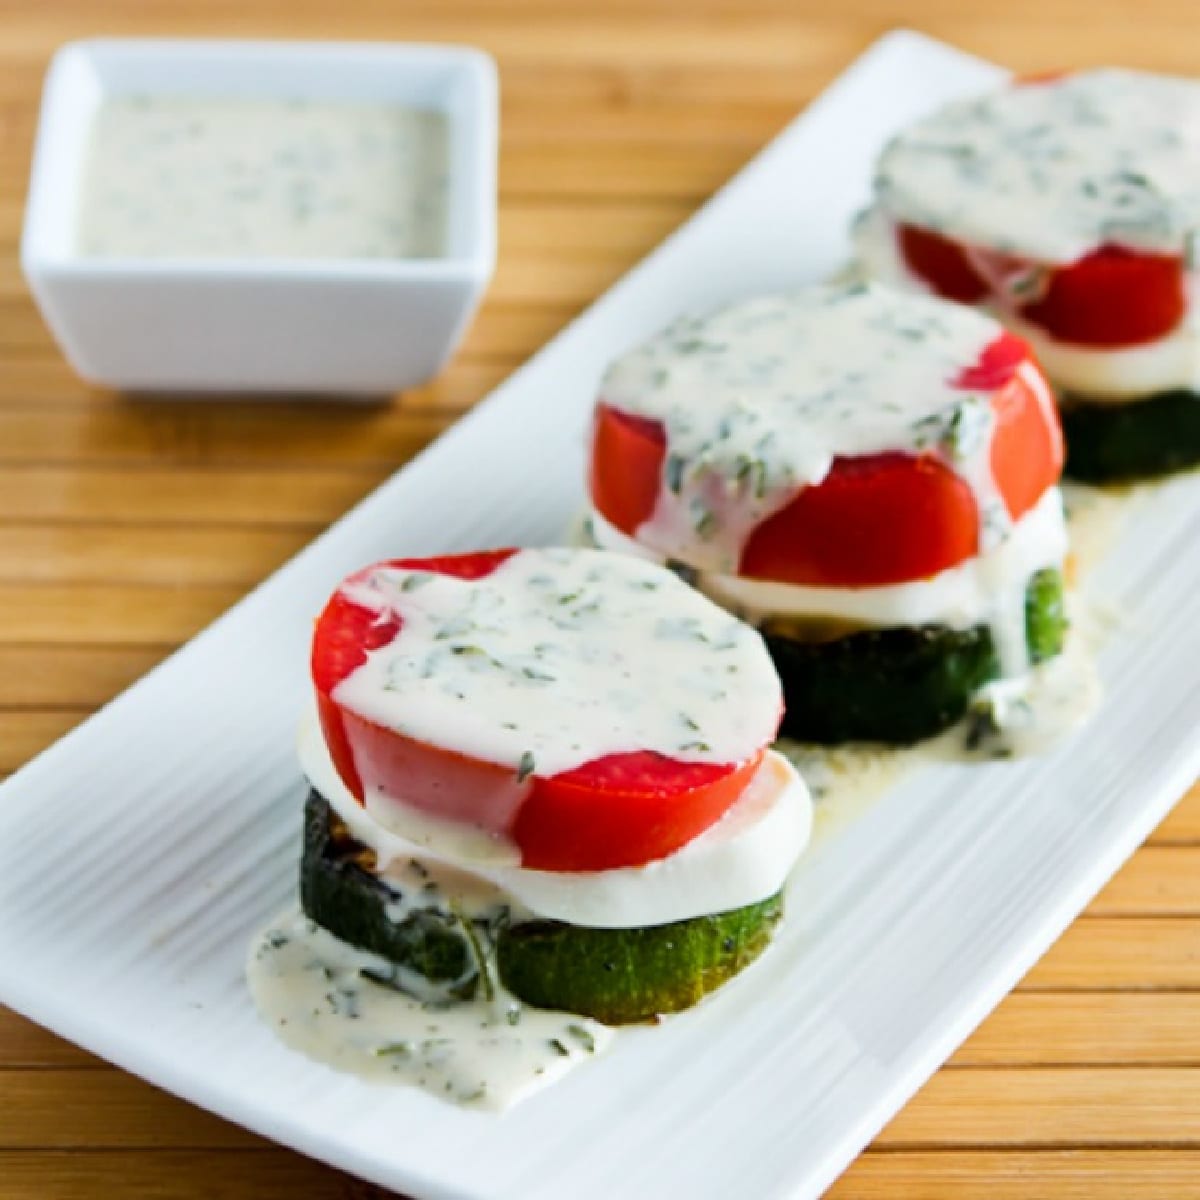 Square image of grilled zucchini caprese salad on a serving plate.